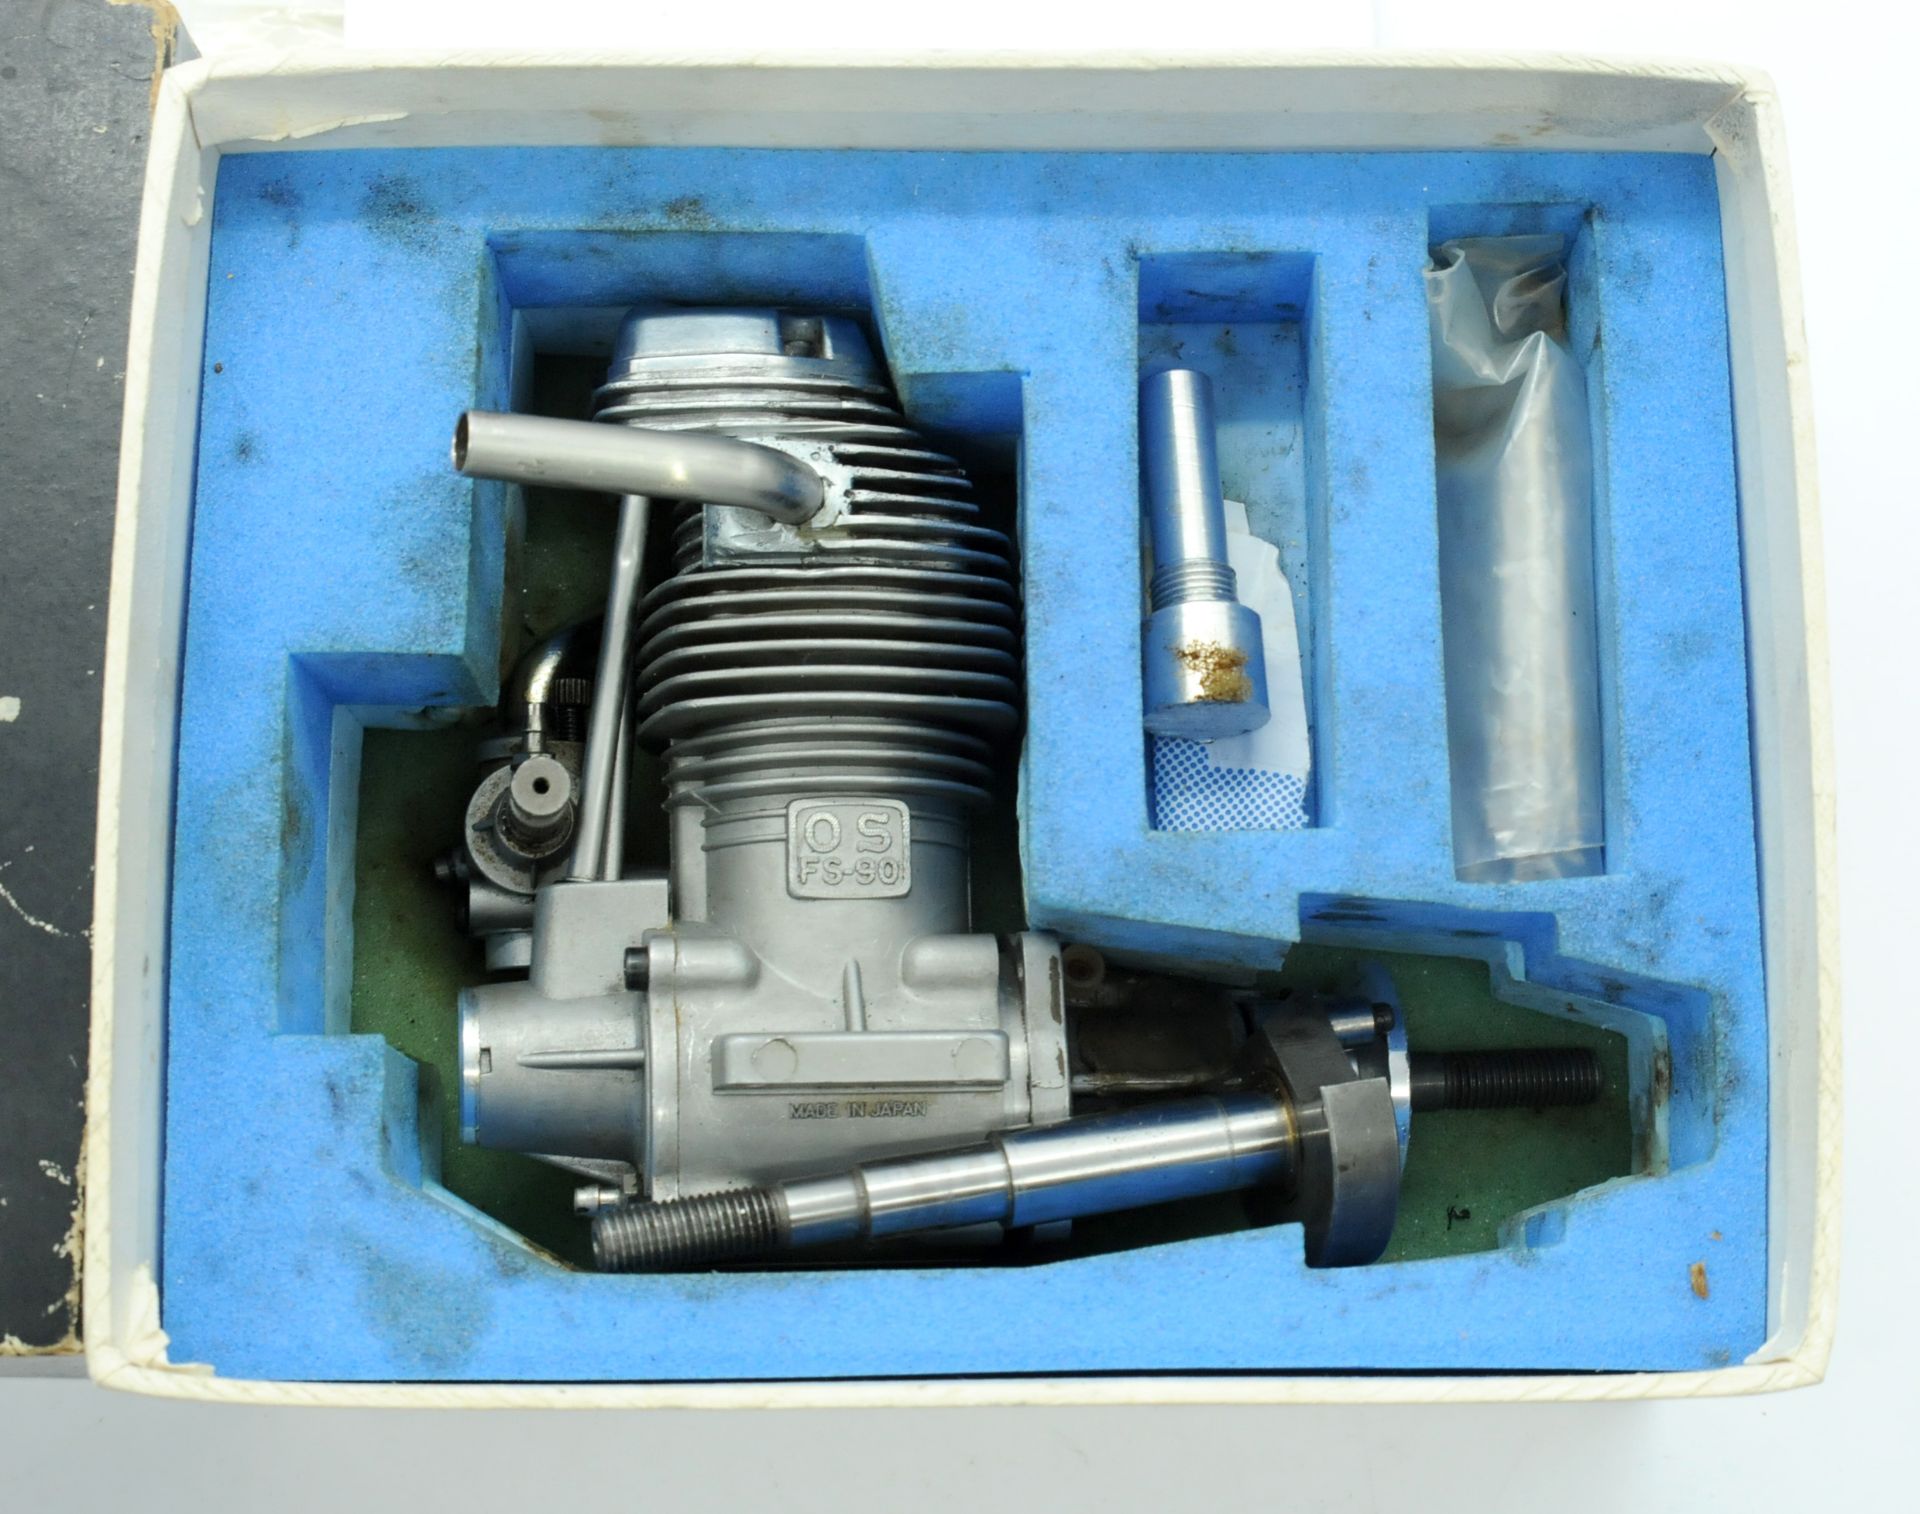 OS Max a boxed FS-90 Four Stroke Engine  - Image 2 of 2